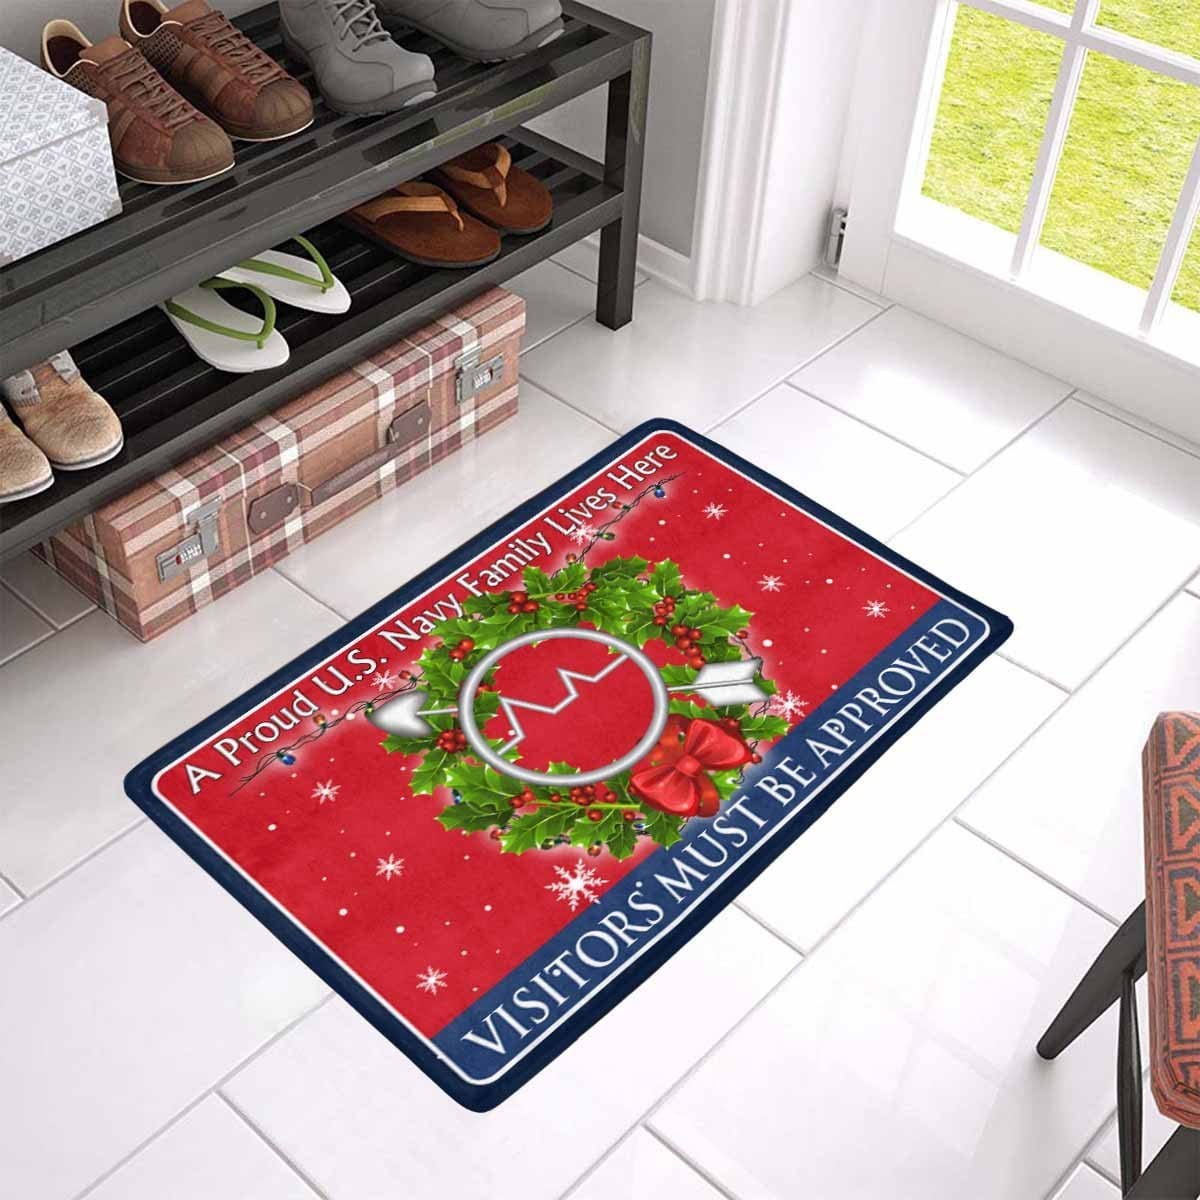 U.S Navy Operations specialist Navy OS - Visitors must be approved - Christmas Doormat-Doormat-Navy-Rate-Veterans Nation